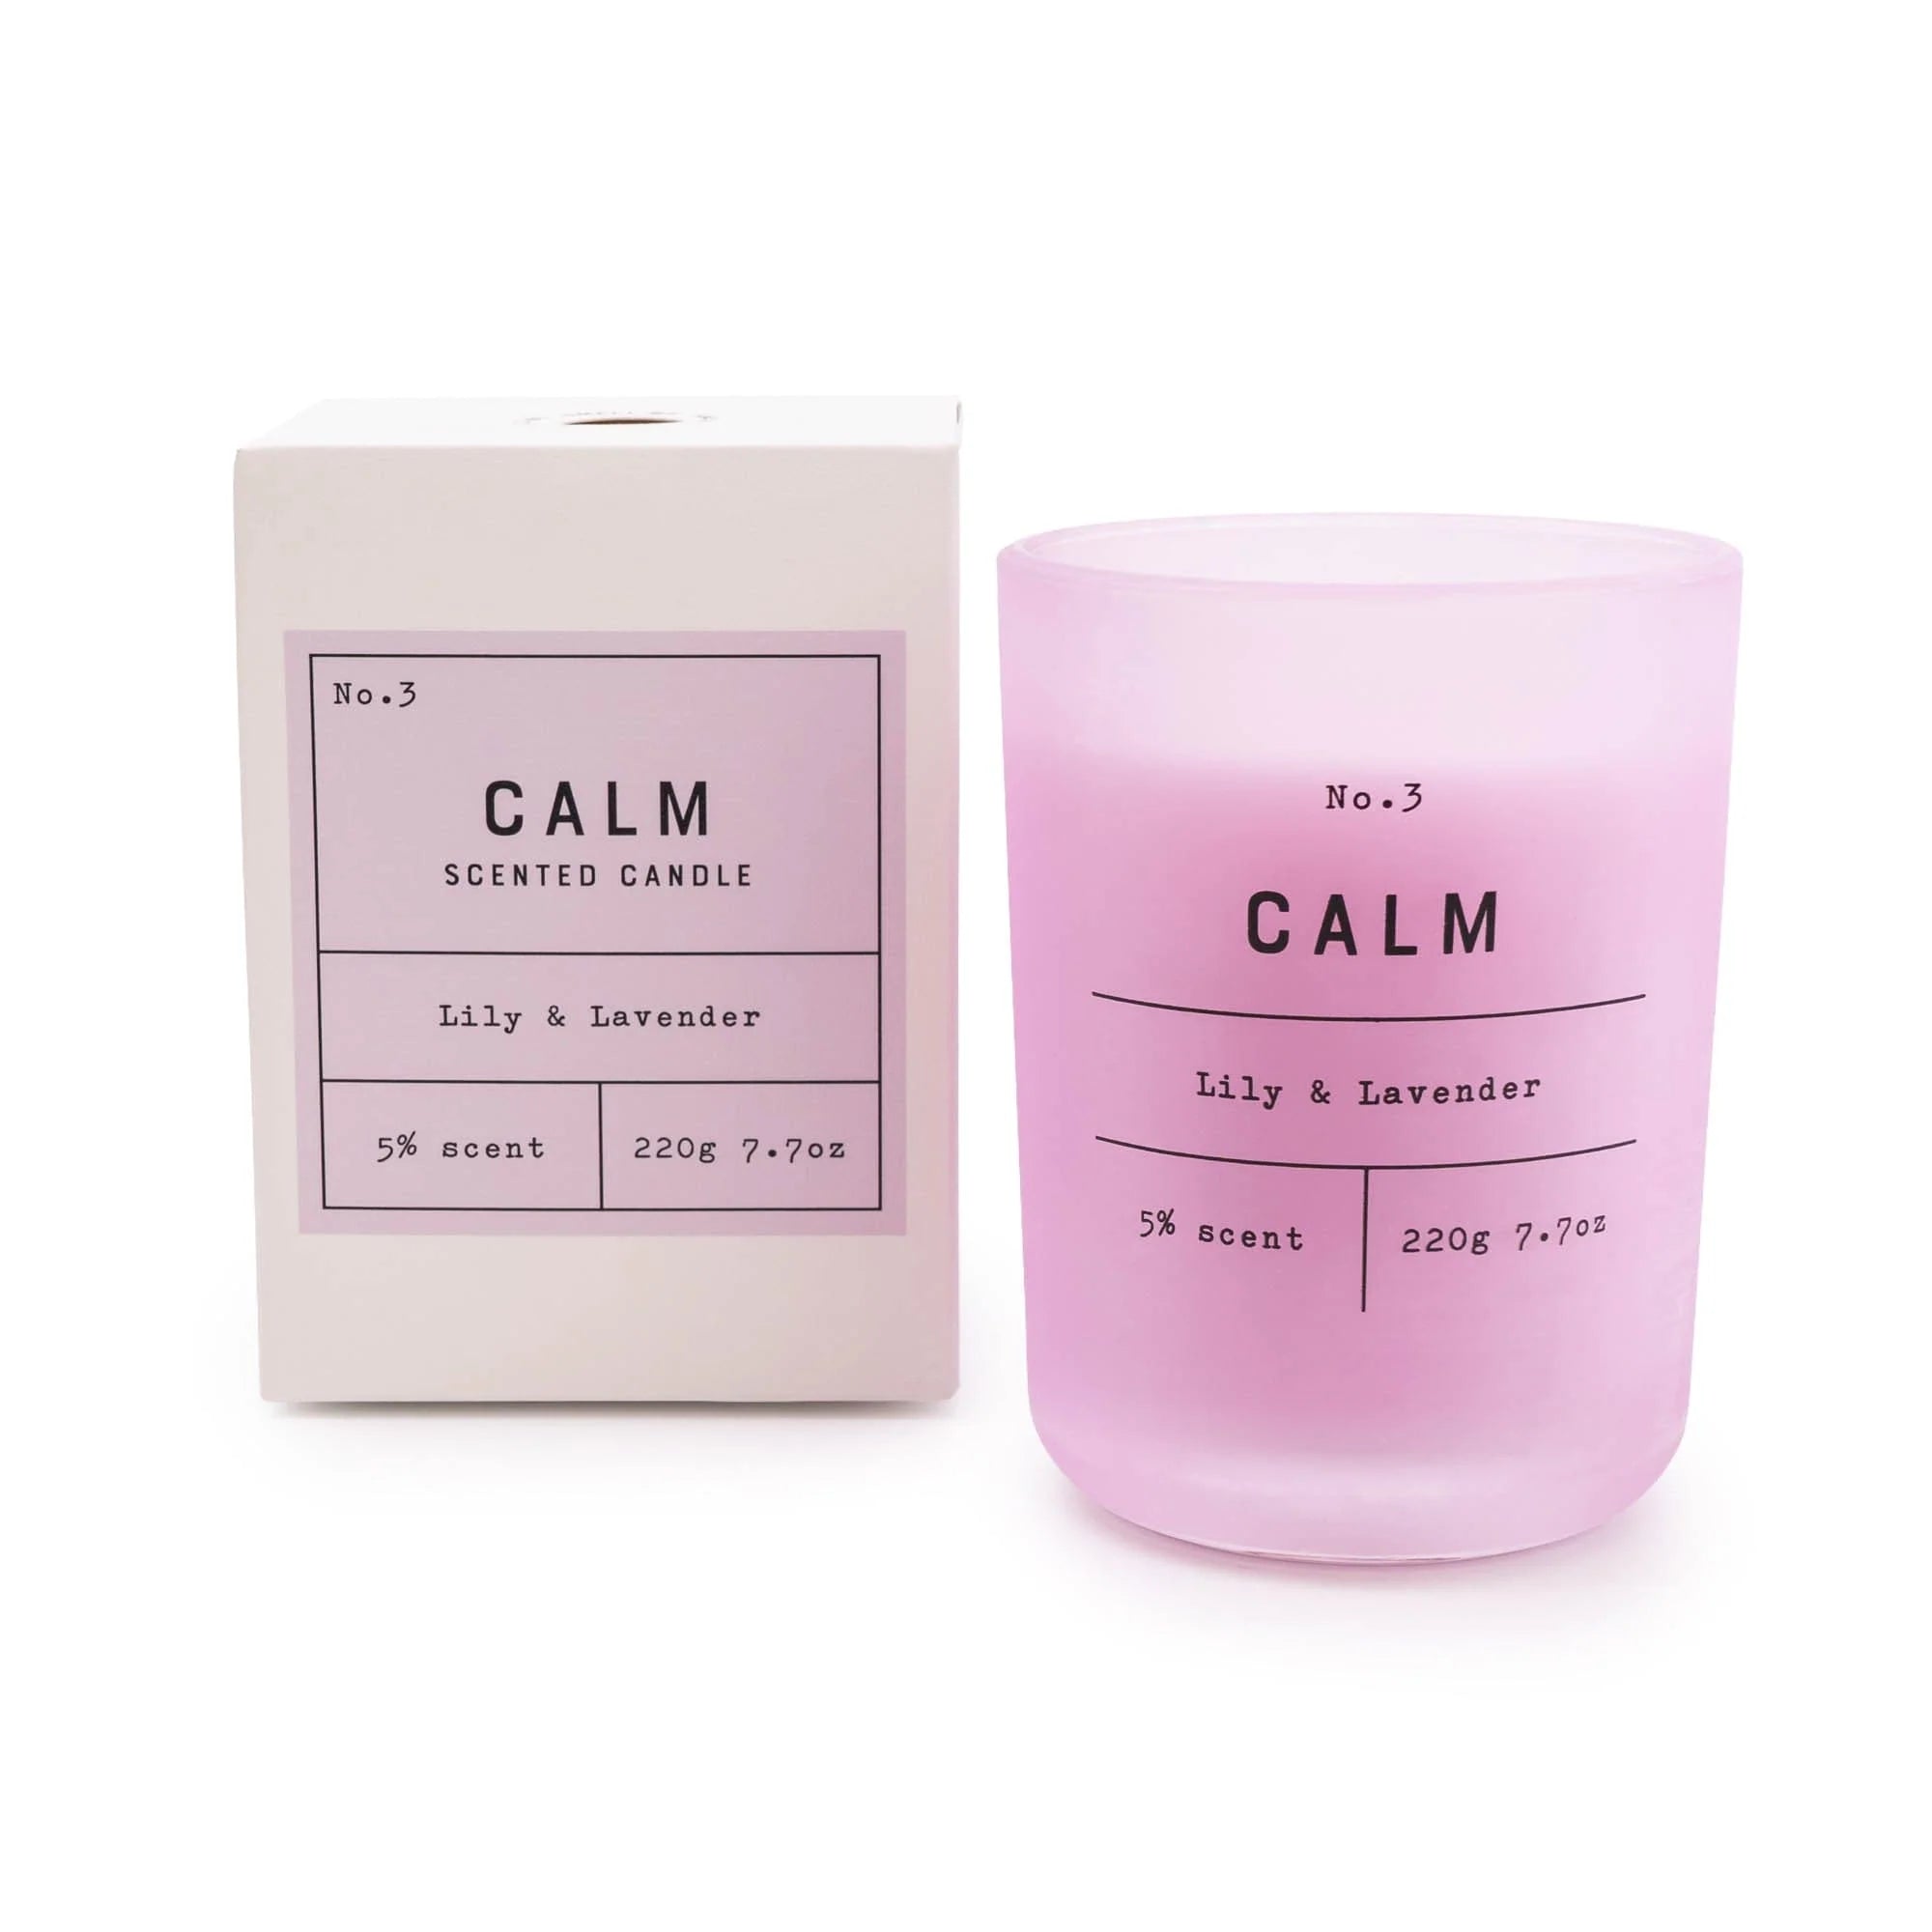 A light pink glass candle 'calm' with a lily and lavender scent